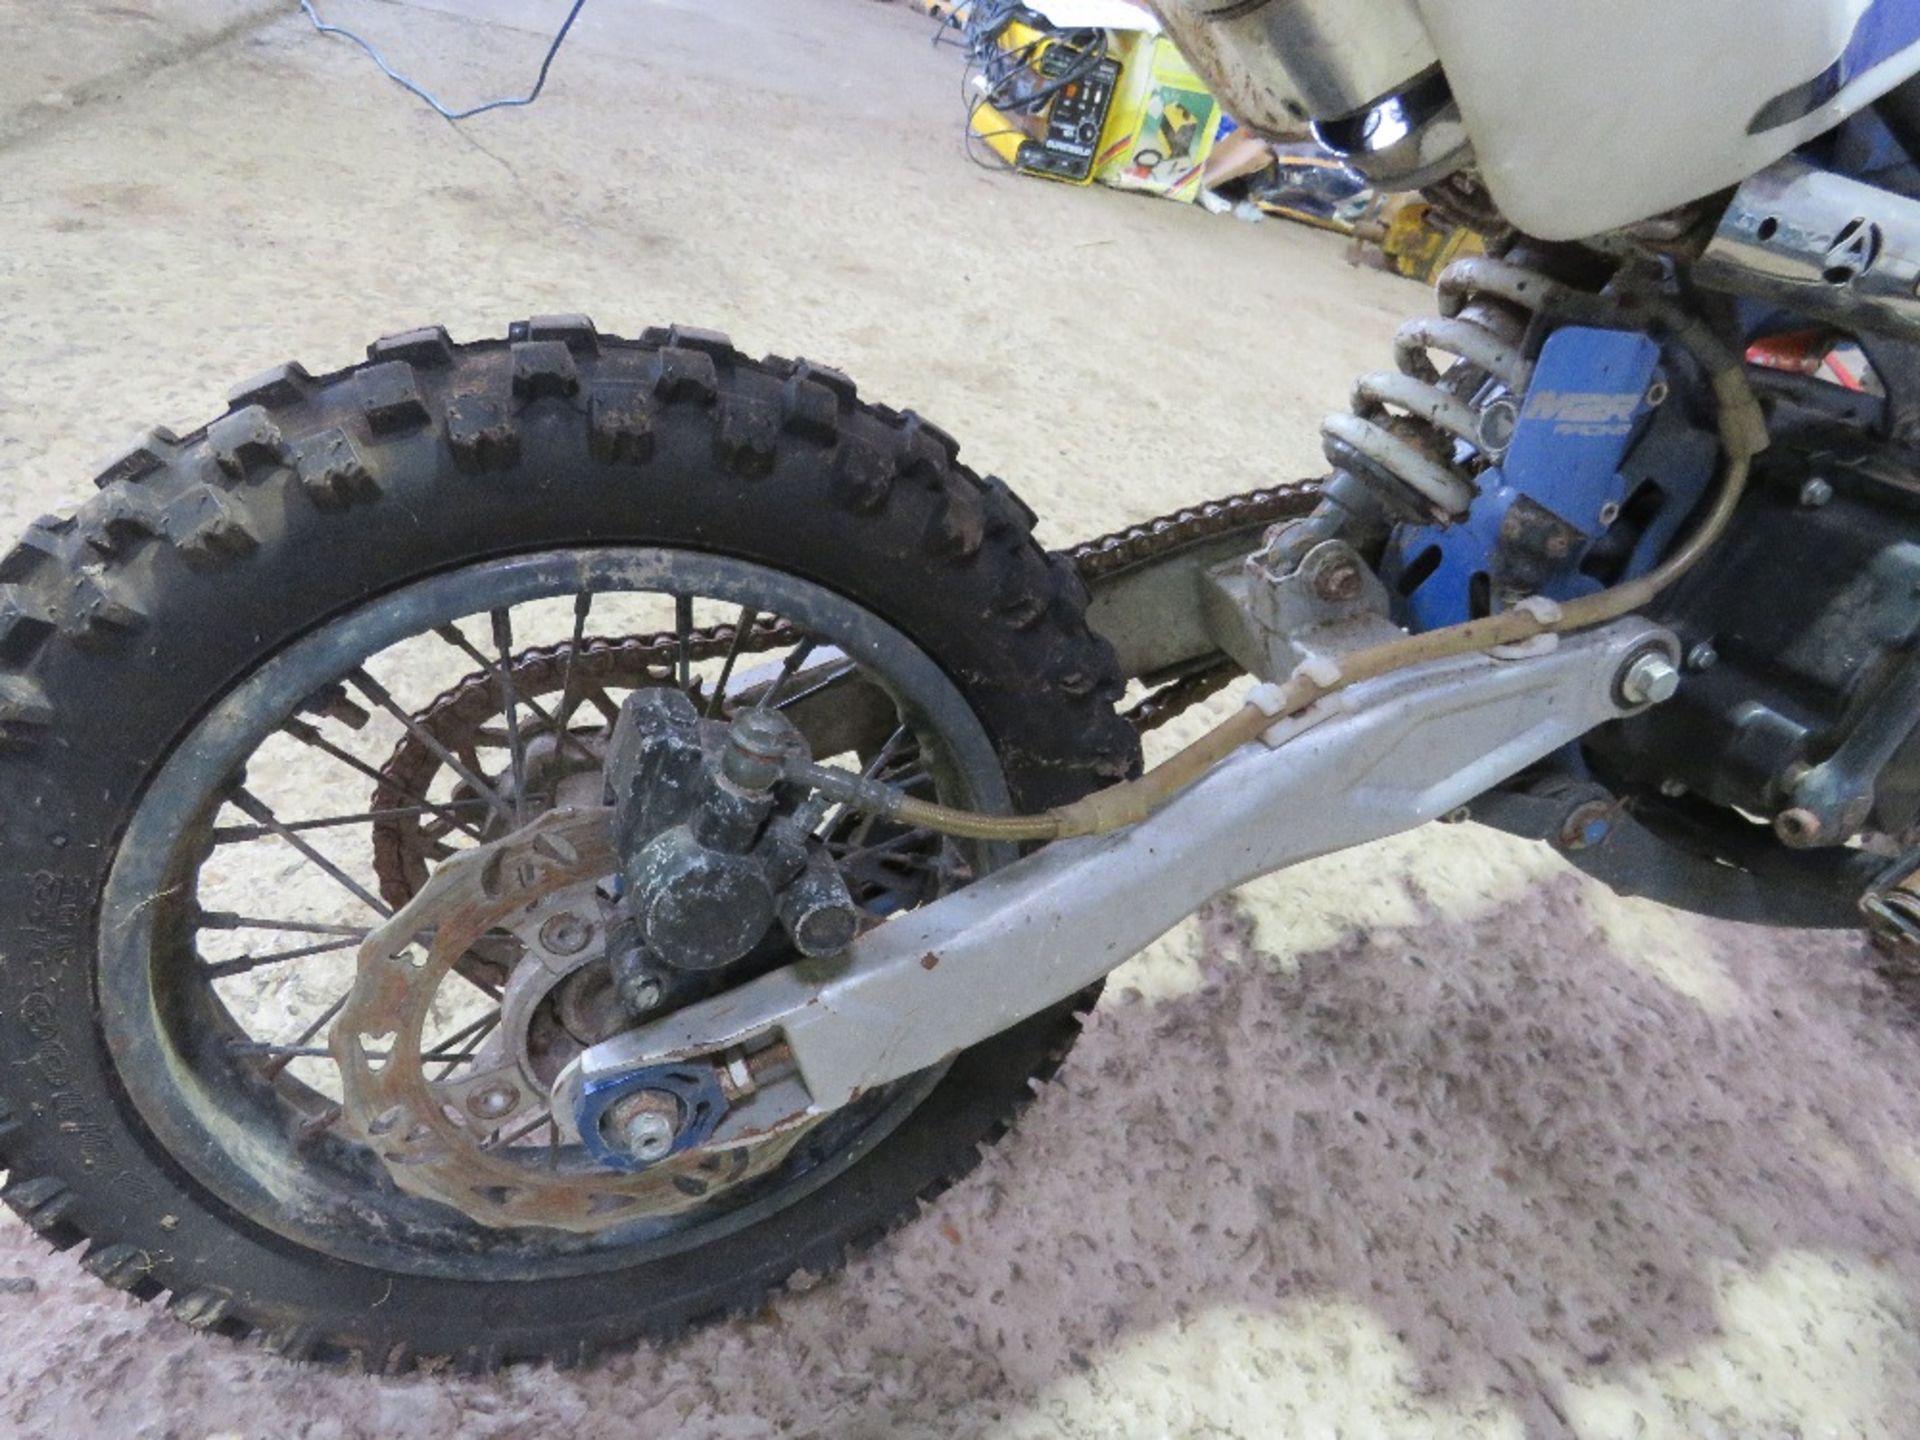 KXF125 CHILD'S SIZE MOTOCROSS TRIAL MOTORBIKE. BEEN IN STORAGE AND UNUSED FOR OVER 5 YEARS. THIS - Image 10 of 10